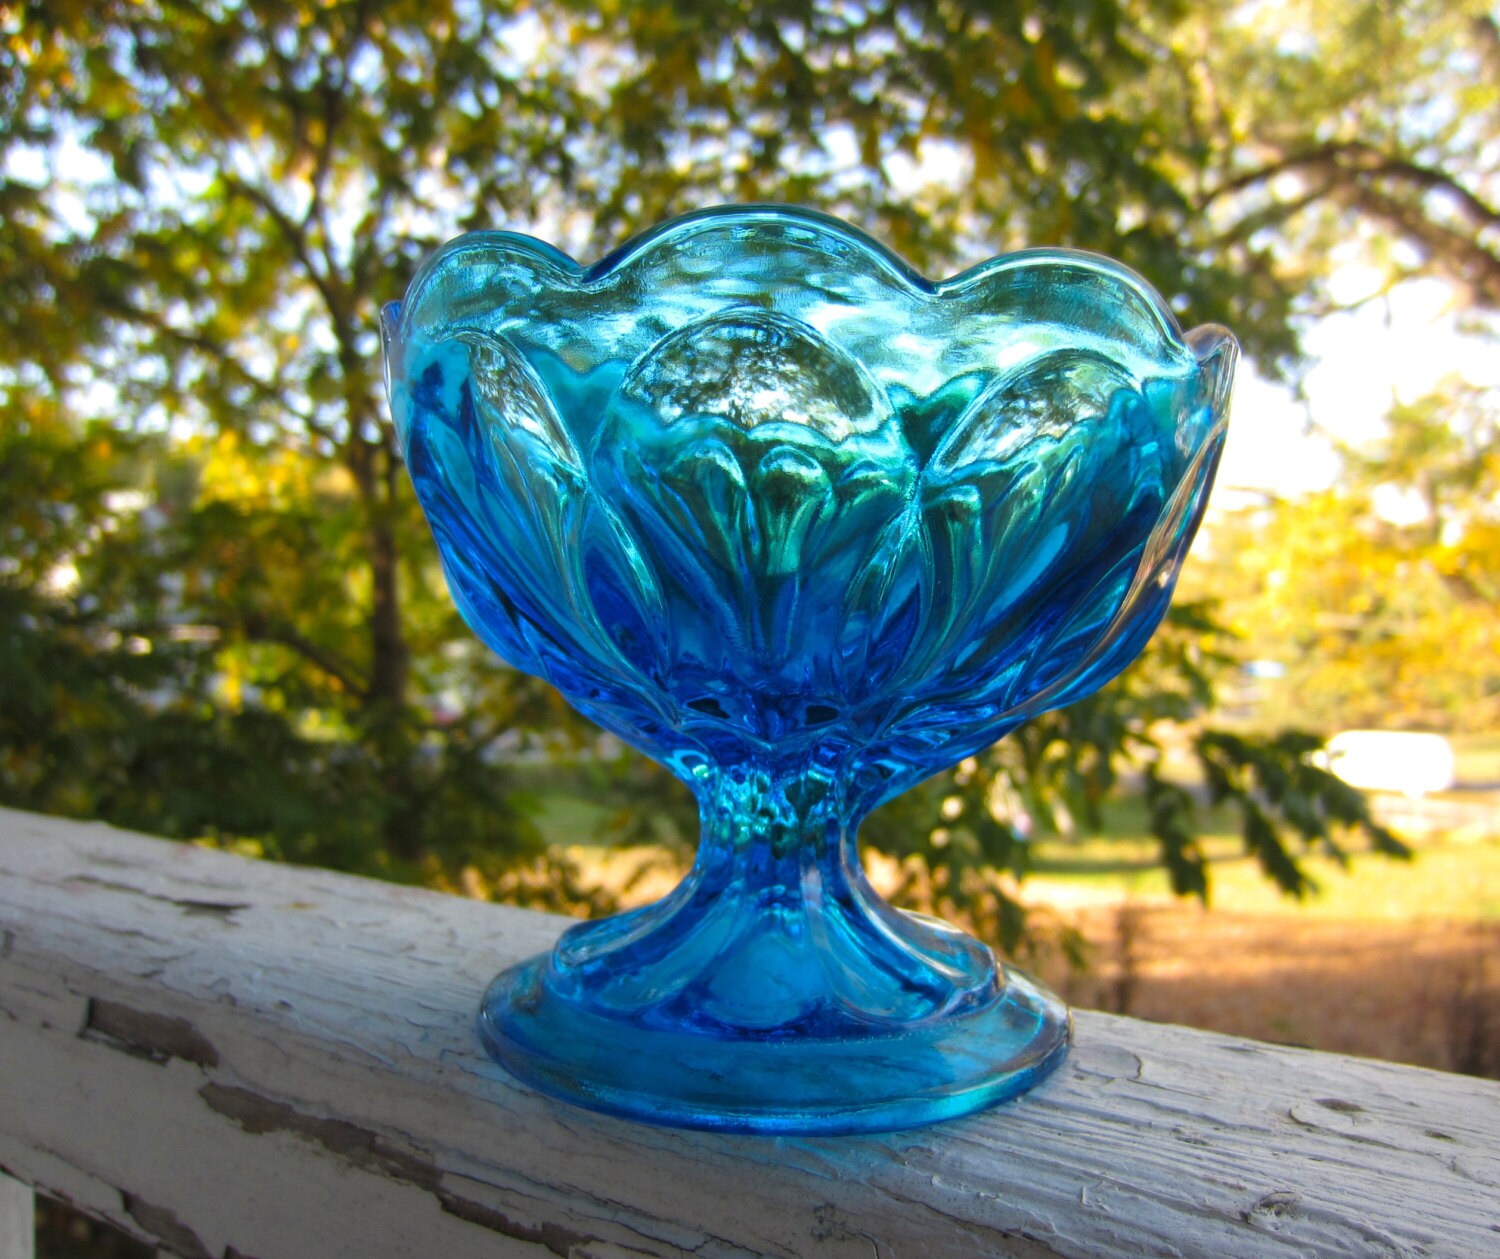 Vintage Cobalt Blue Footed Glass Sherbet Style Or Compote Bowl